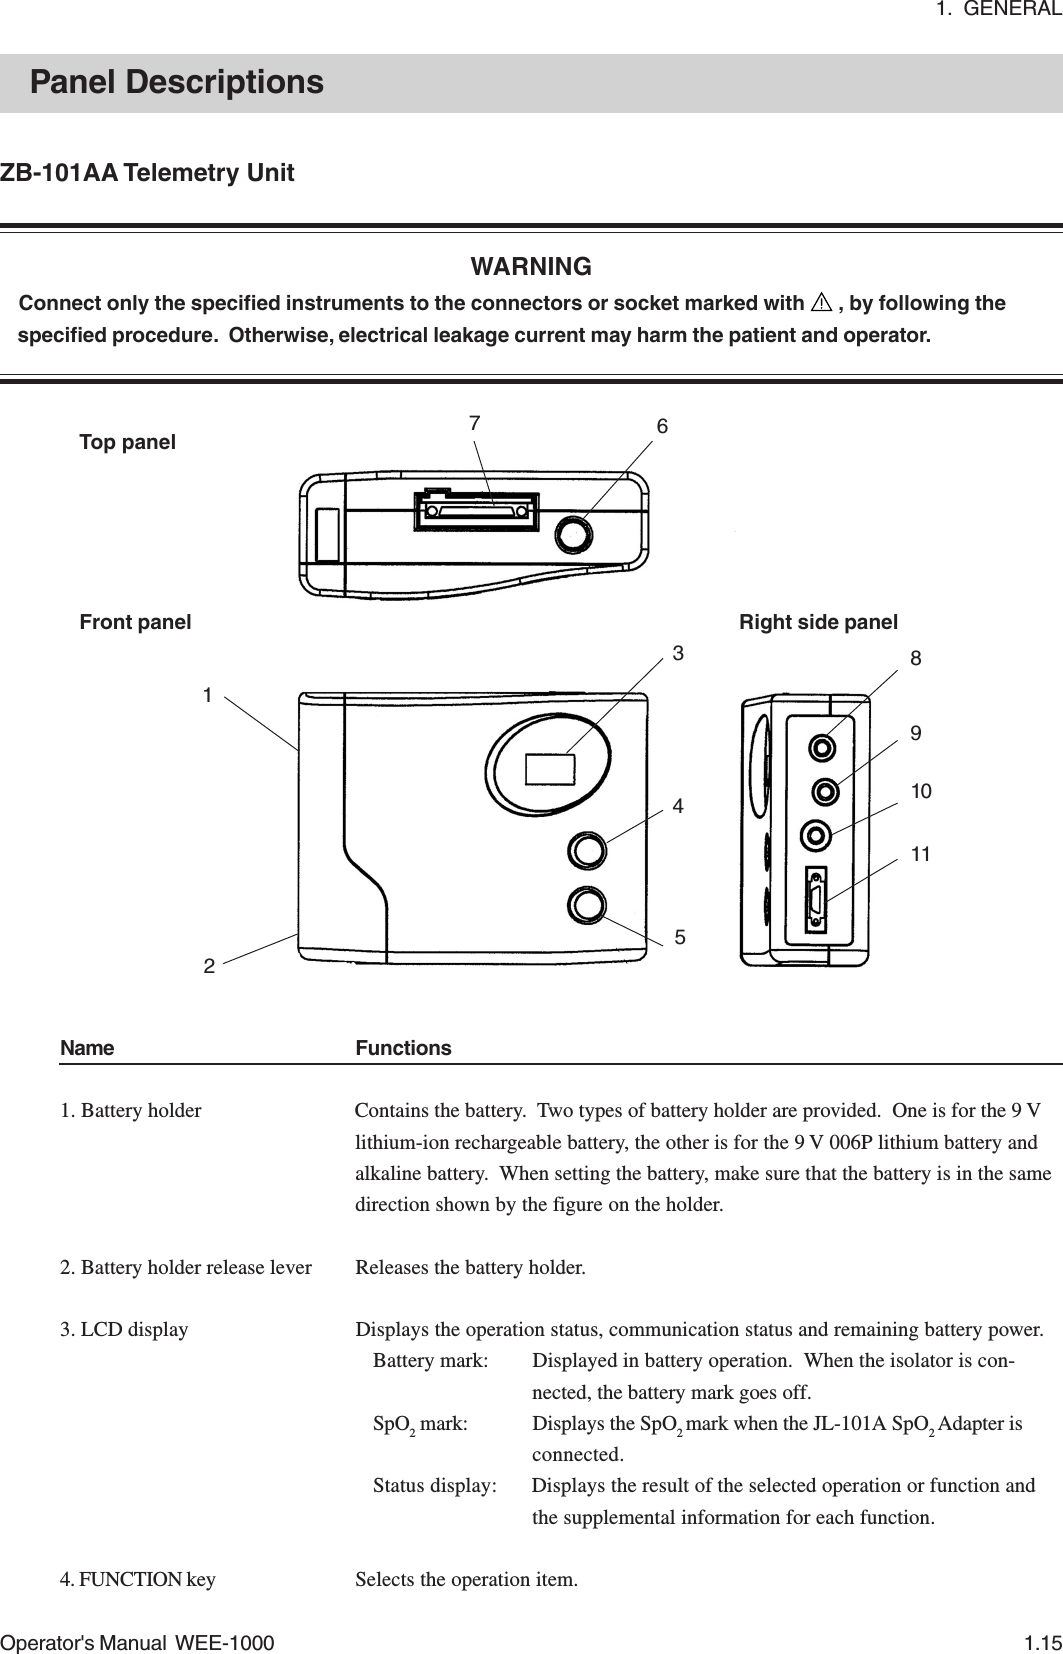 1.  GENERALOperator&apos;s Manual  WEE-1000 1.15Name Functions1. Battery holder Contains the battery.  Two types of battery holder are provided.  One is for the 9 Vlithium-ion rechargeable battery, the other is for the 9 V 006P lithium battery andalkaline battery.  When setting the battery, make sure that the battery is in the samedirection shown by the figure on the holder.2. Battery holder release lever Releases the battery holder.3. LCD display Displays the operation status, communication status and remaining battery power.Battery mark: Displayed in battery operation.  When the isolator is con-nected, the battery mark goes off.SpO2 mark: Displays the SpO2 mark when the JL-101A SpO2 Adapter isconnected.Status display: Displays the result of the selected operation or function andthe supplemental information for each function.4. FUNCTION key Selects the operation item.ZB-101AA Telemetry UnitWARNINGConnect only the specified instruments to the connectors or socket marked with   , by following thespecified procedure.  Otherwise, electrical leakage current may harm the patient and operator.1345678910112Top panelFront panel Right side panelPanel Descriptions